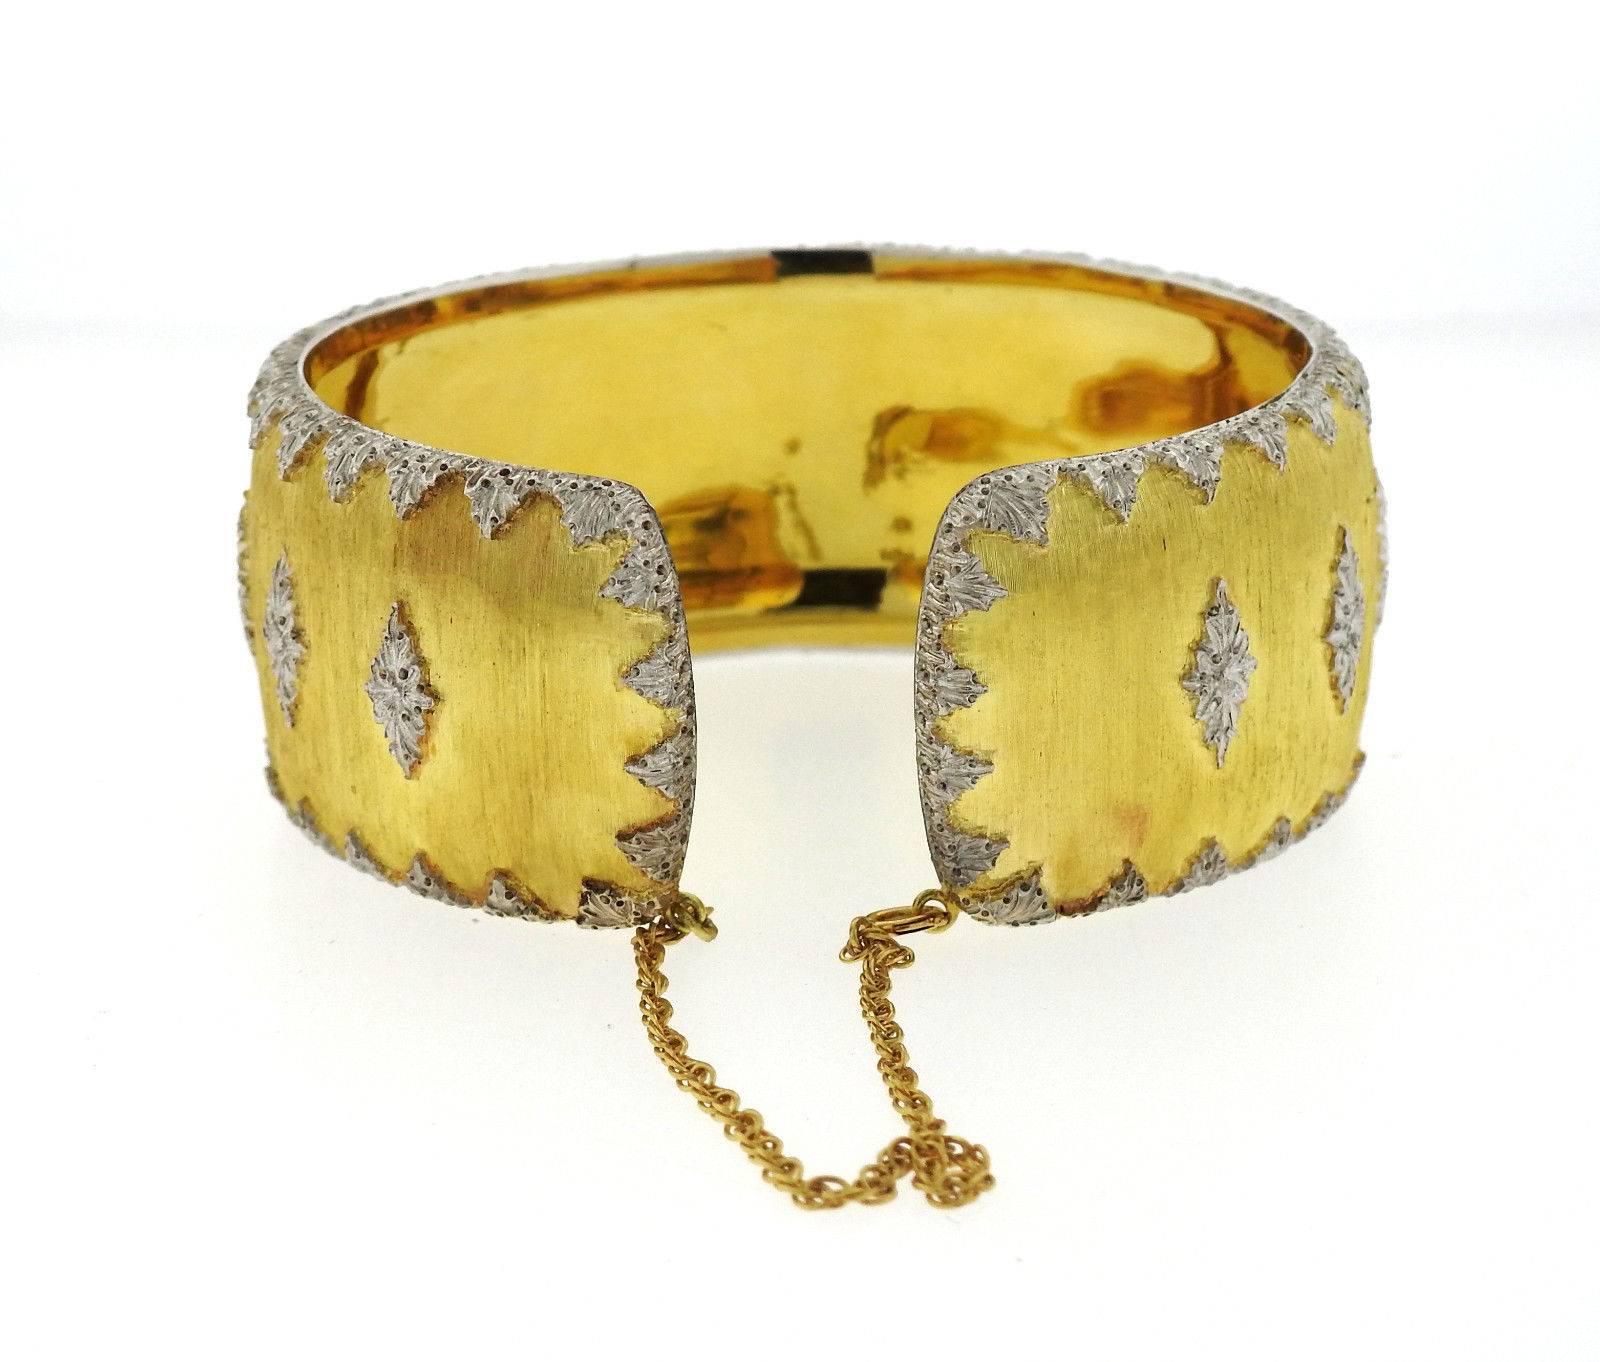 An 18k yellow and white gold cuff bracelet by Buccellati.  The bracelet will fit up to a 6 3/4